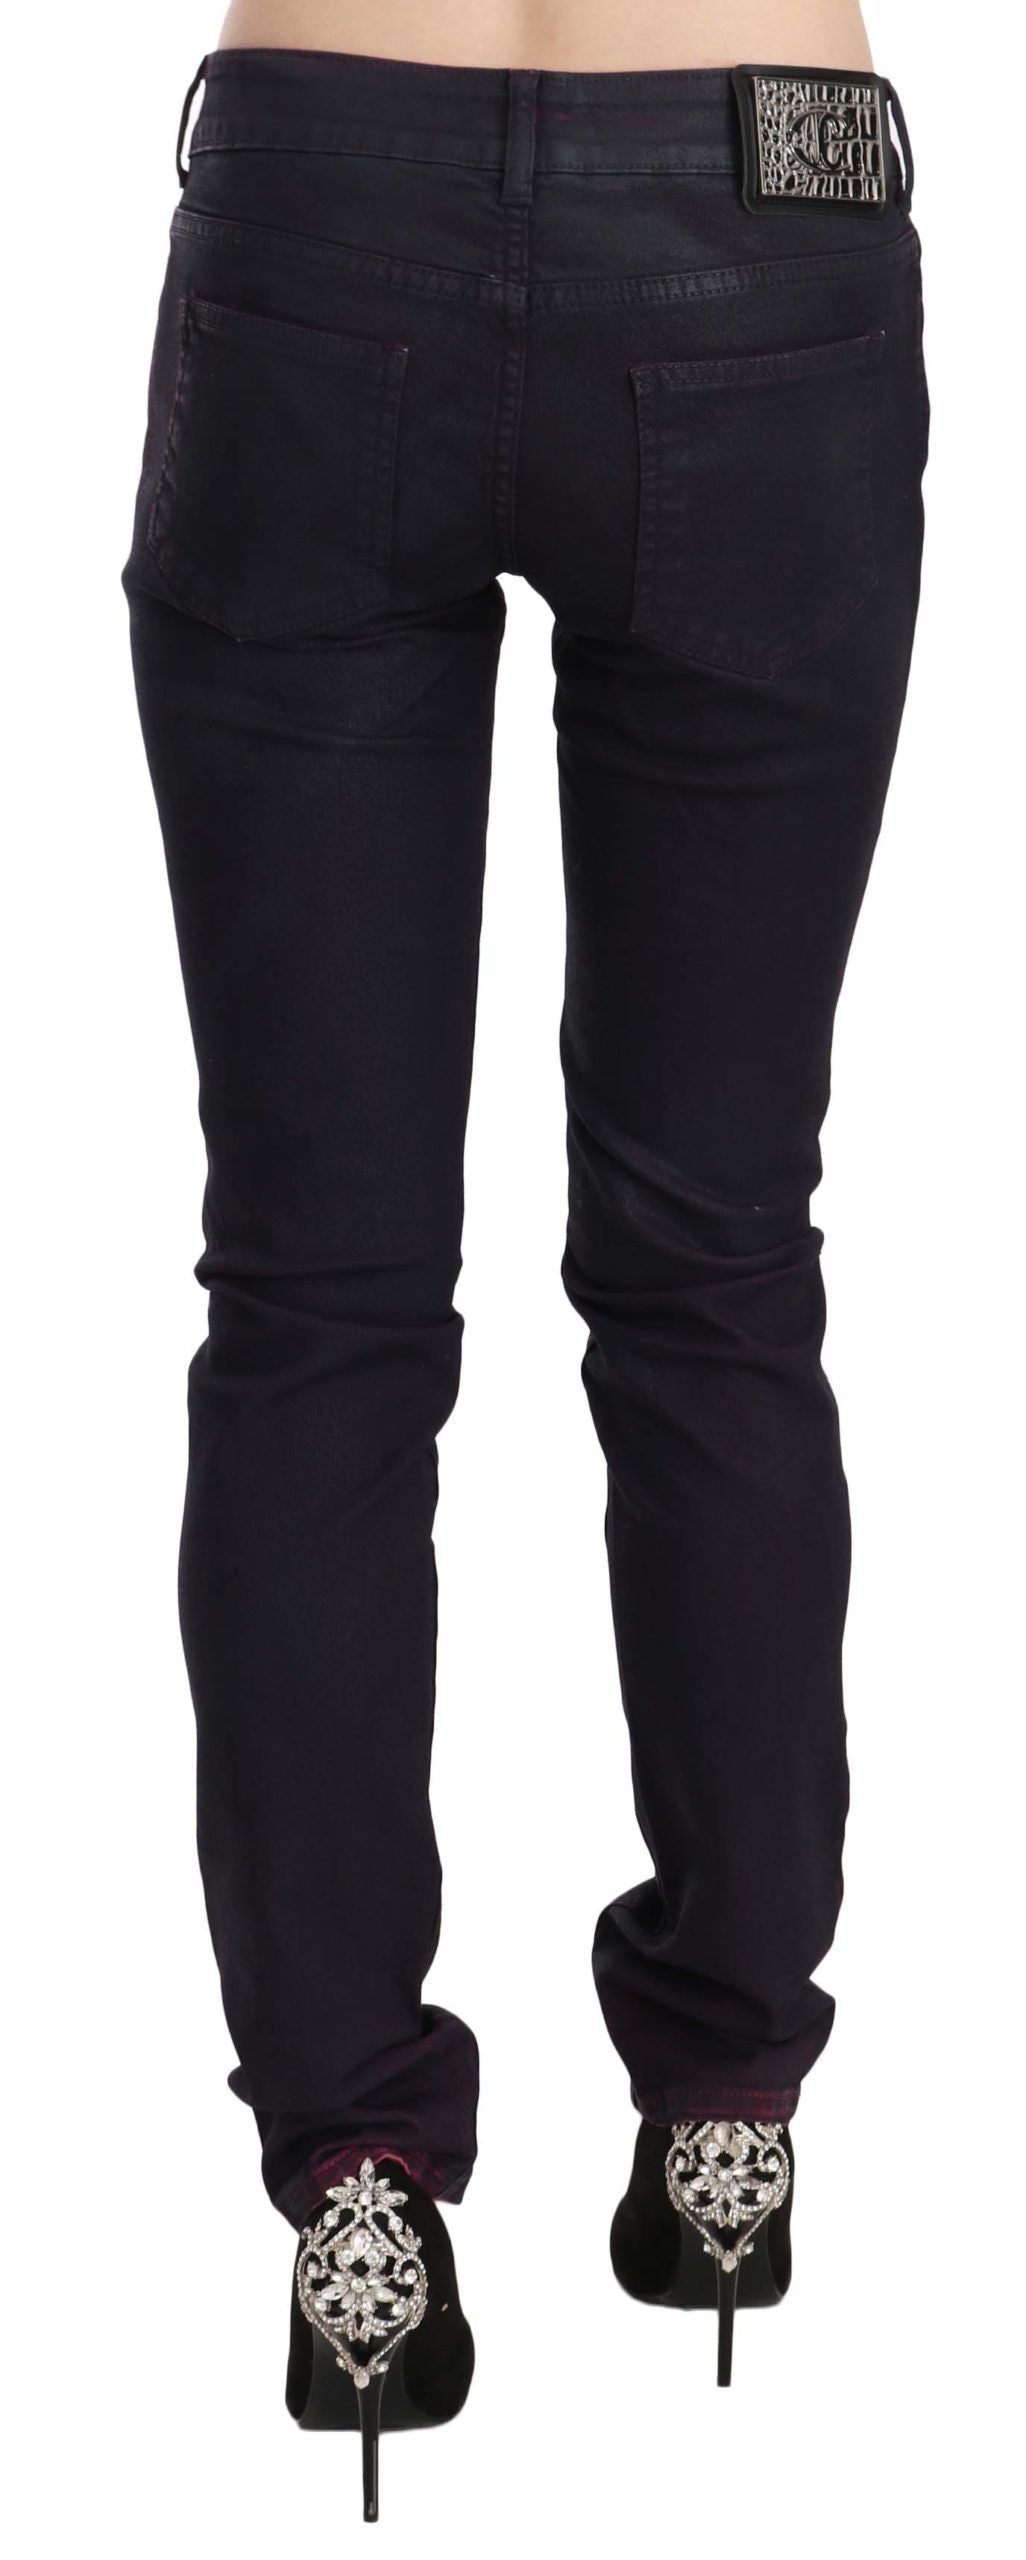 Black Cotton Low Waist Skinny Denim Pants - Designed by Just Cavalli Available to Buy at a Discounted Price on Moon Behind The Hill Online Designer Discount Store